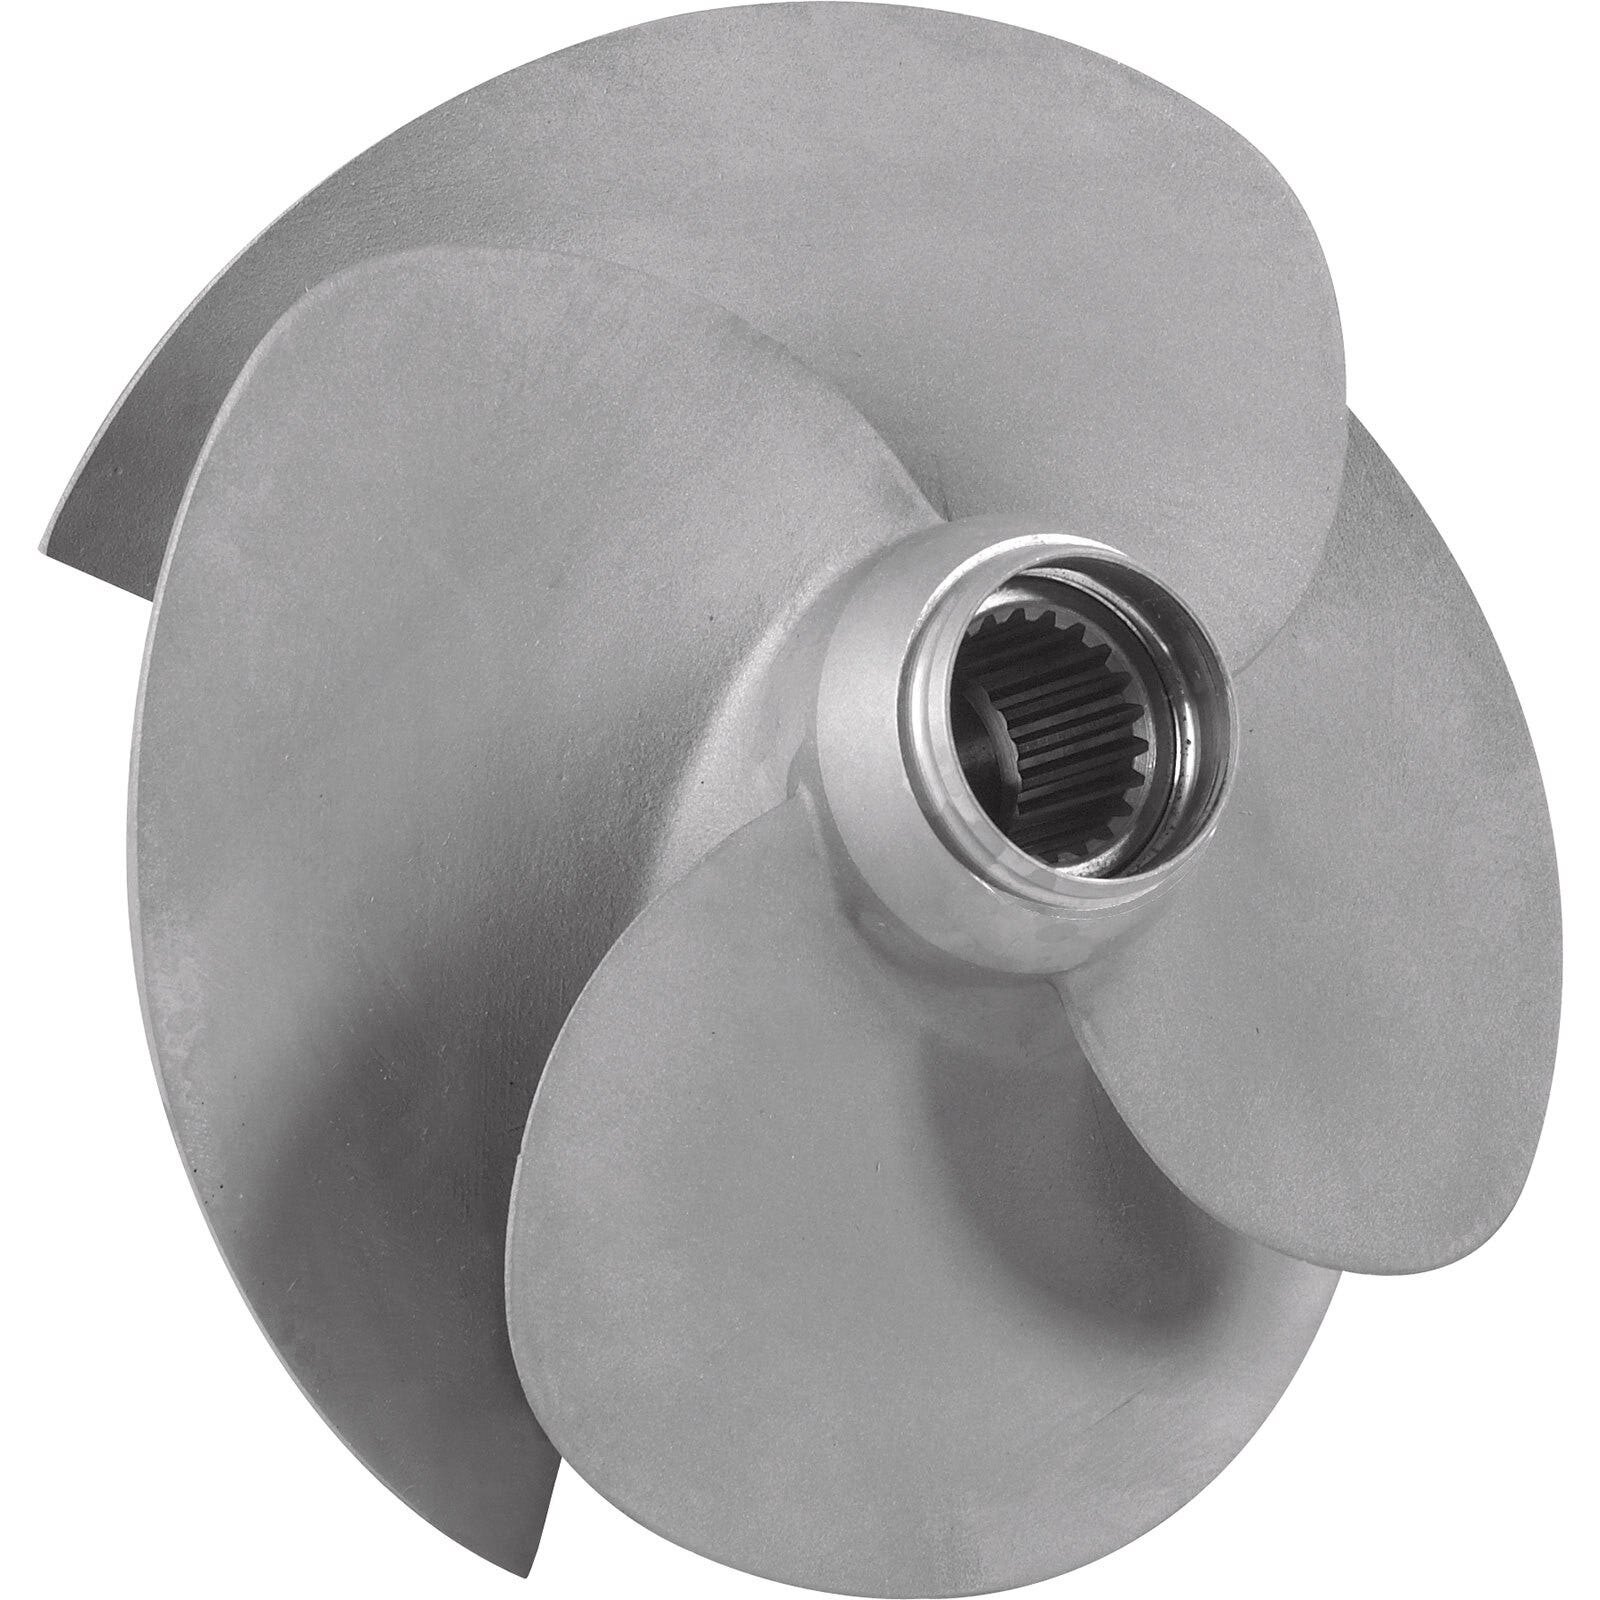 GTI 90 and GTI SE 90 (2017 2019), GTS 90 (2017 2018) Impeller